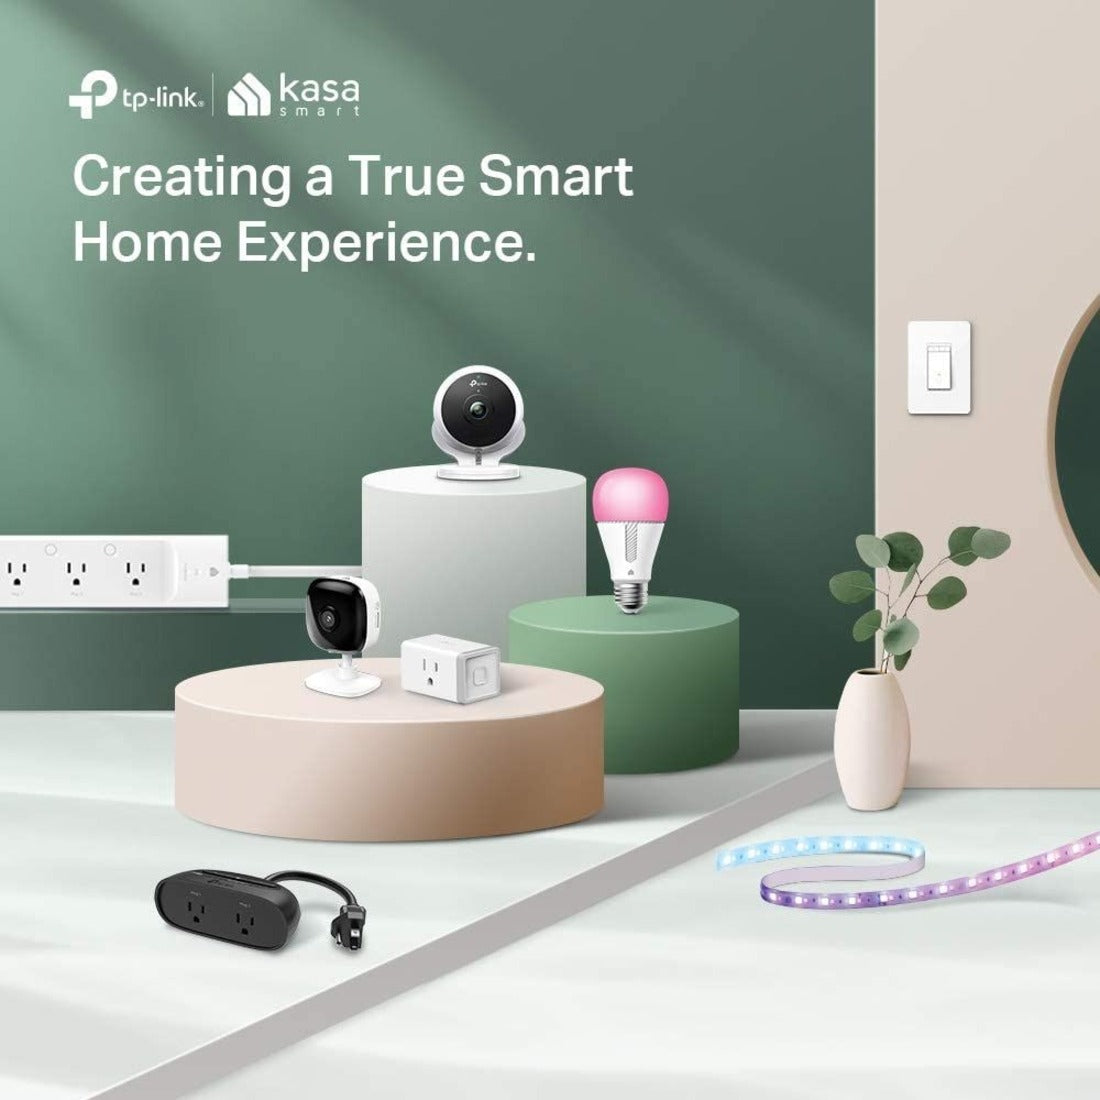 Kasa Smart EP10P4 Smart WiFi Plug Mini 15A - 4-Pack, Control Your Electrical Devices with Ease